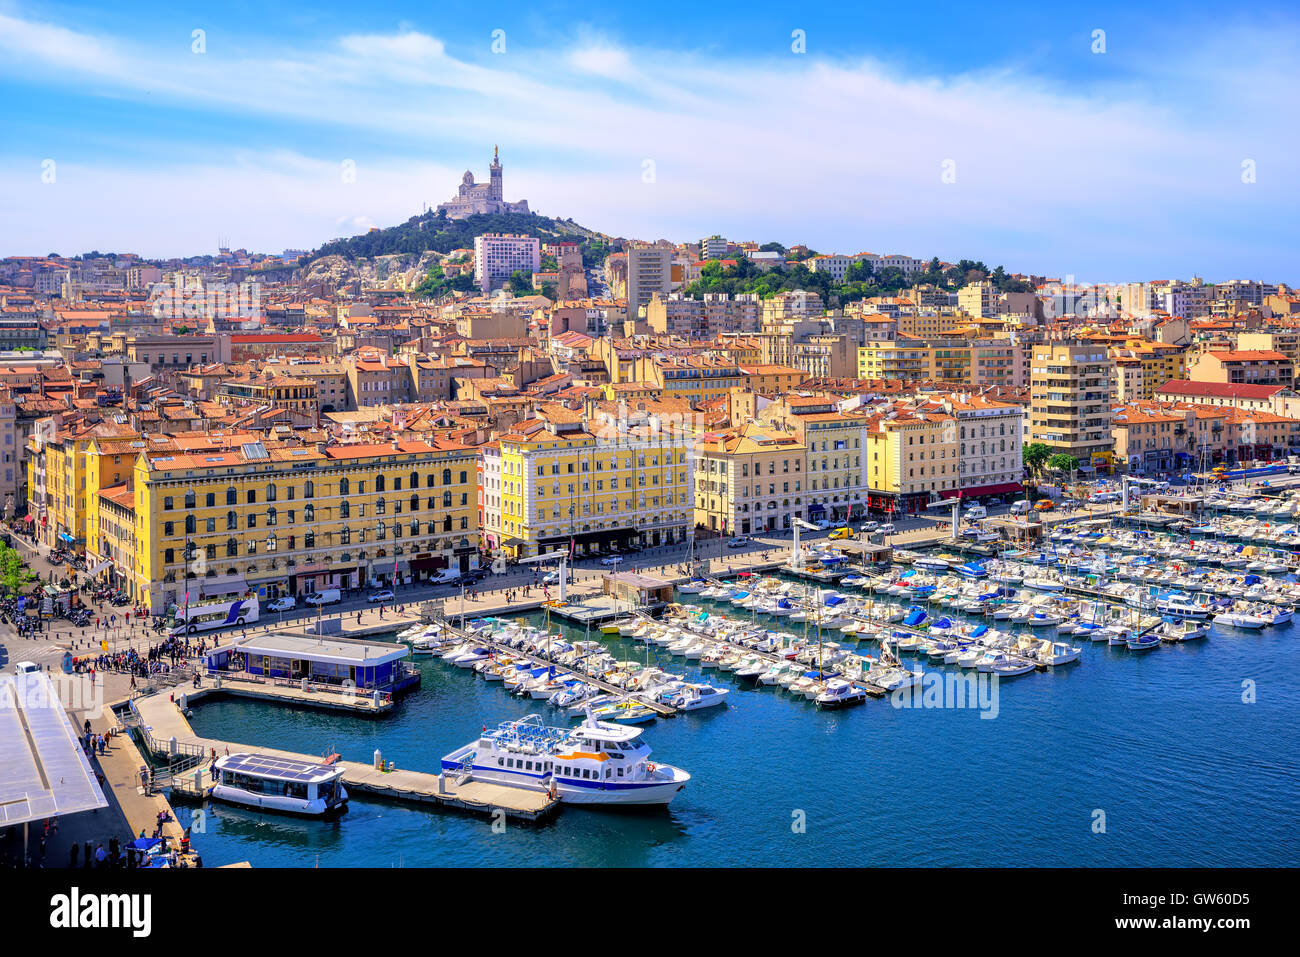 The old Vieux Port and Basilica Notre Dame de la Garde in the historical city center of Marseilles, France Stock Photo